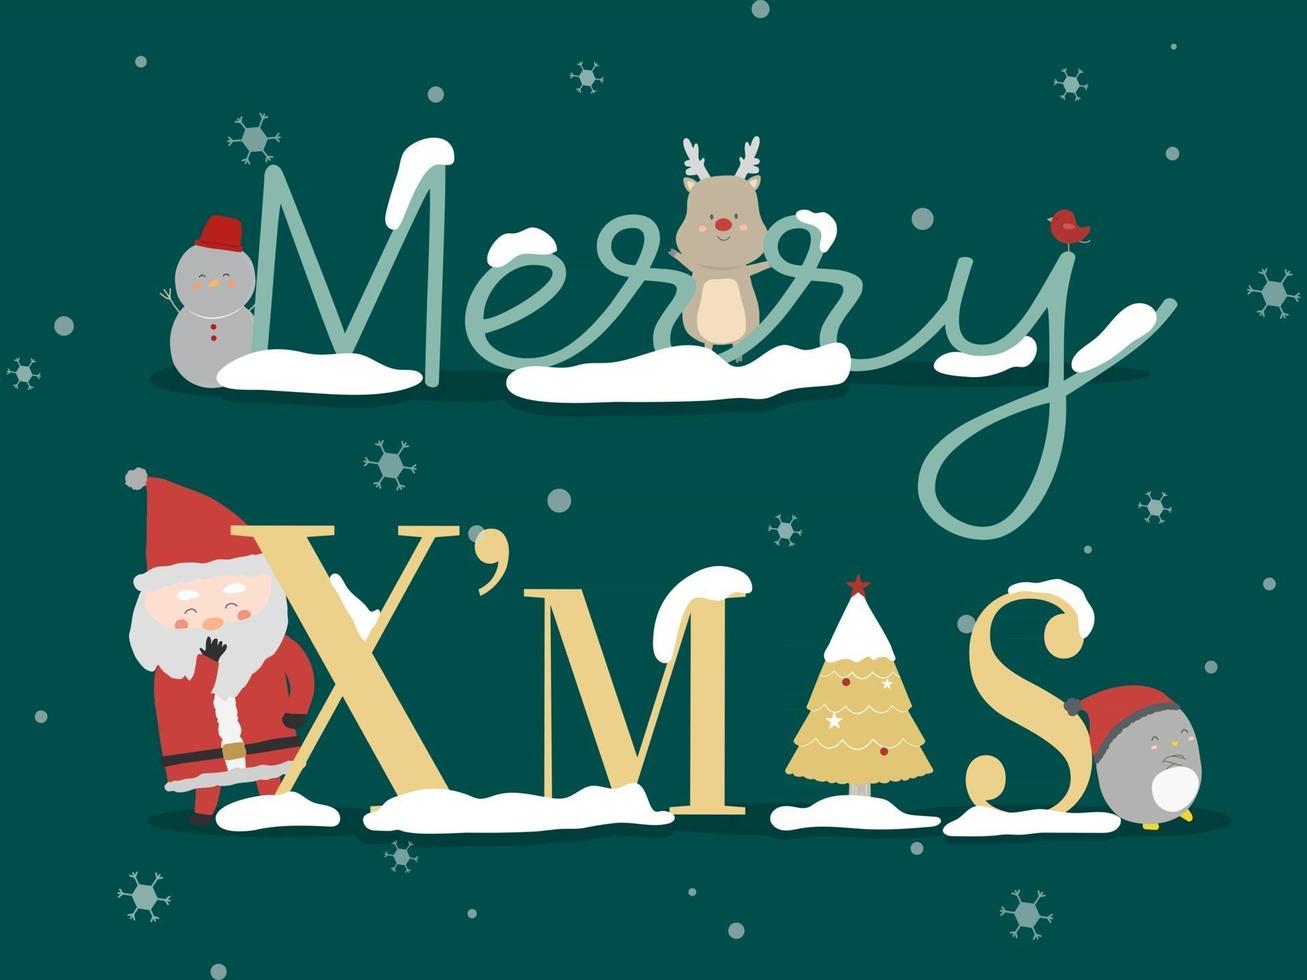 Merry Christmas with Santa Claus Reindeer and snowman on green background vector